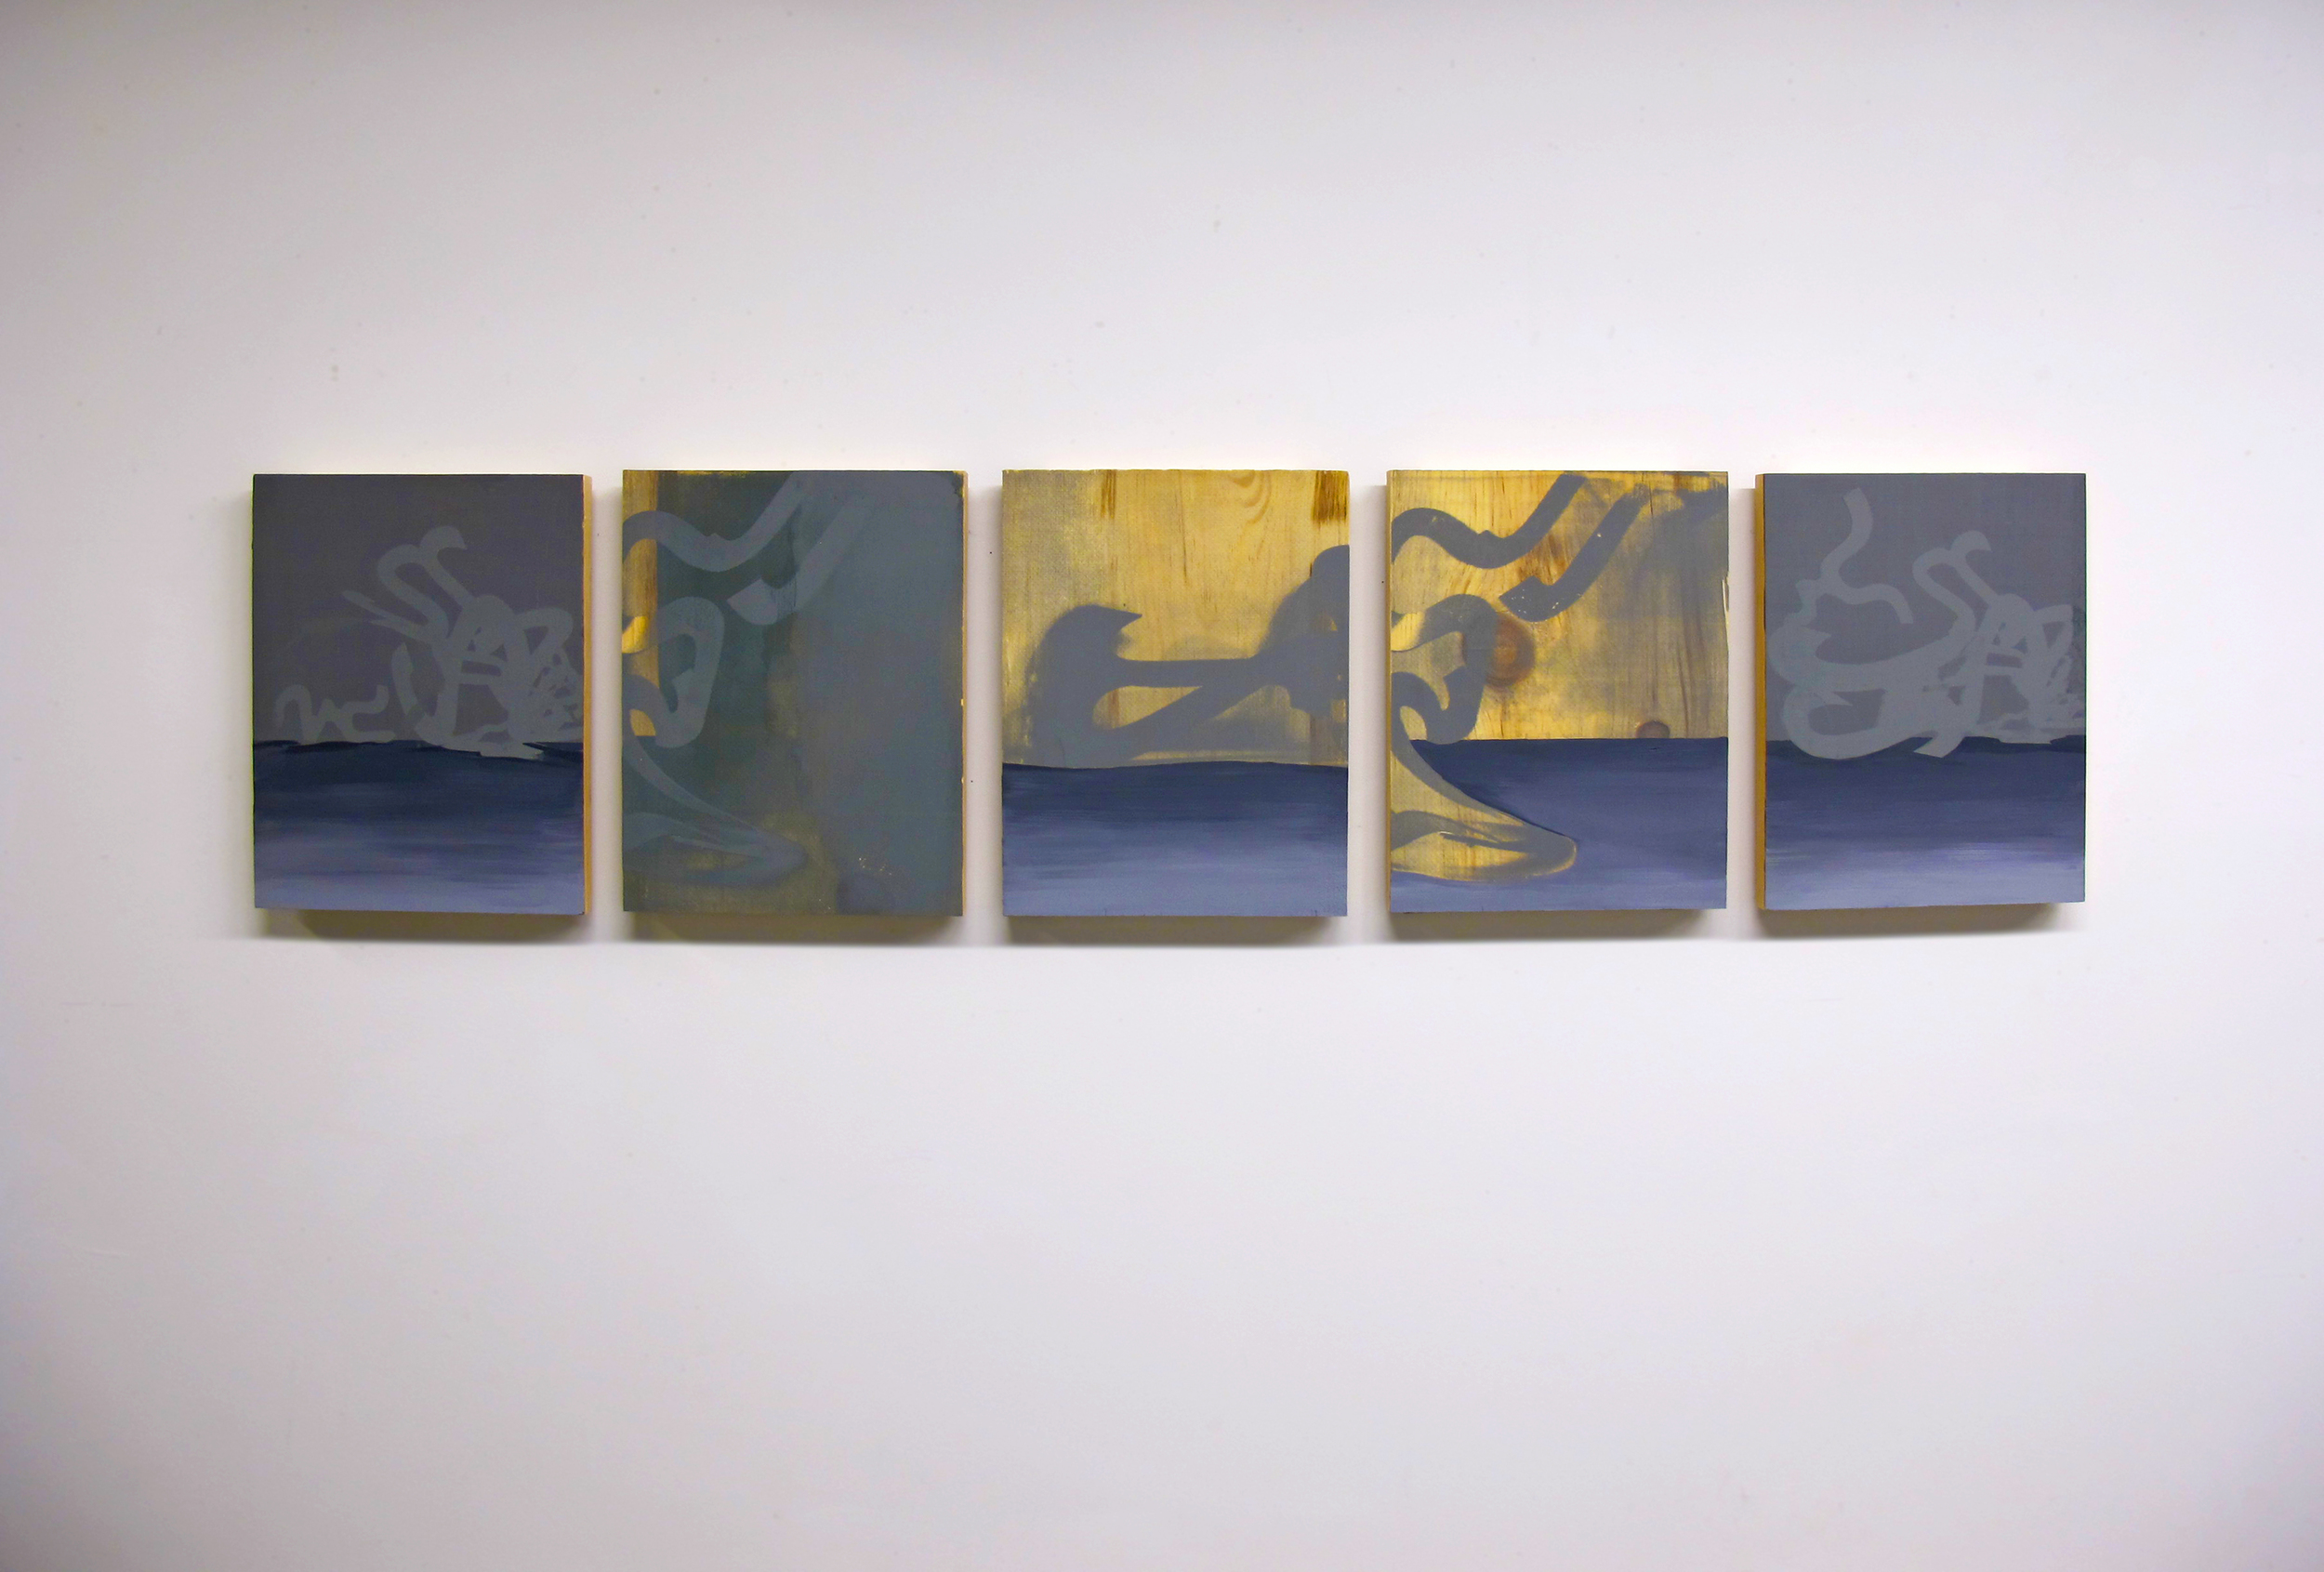   Iterative Translations , 2013.&nbsp;Screen print &amp; acrylic on wood, 12" x 46" overall 